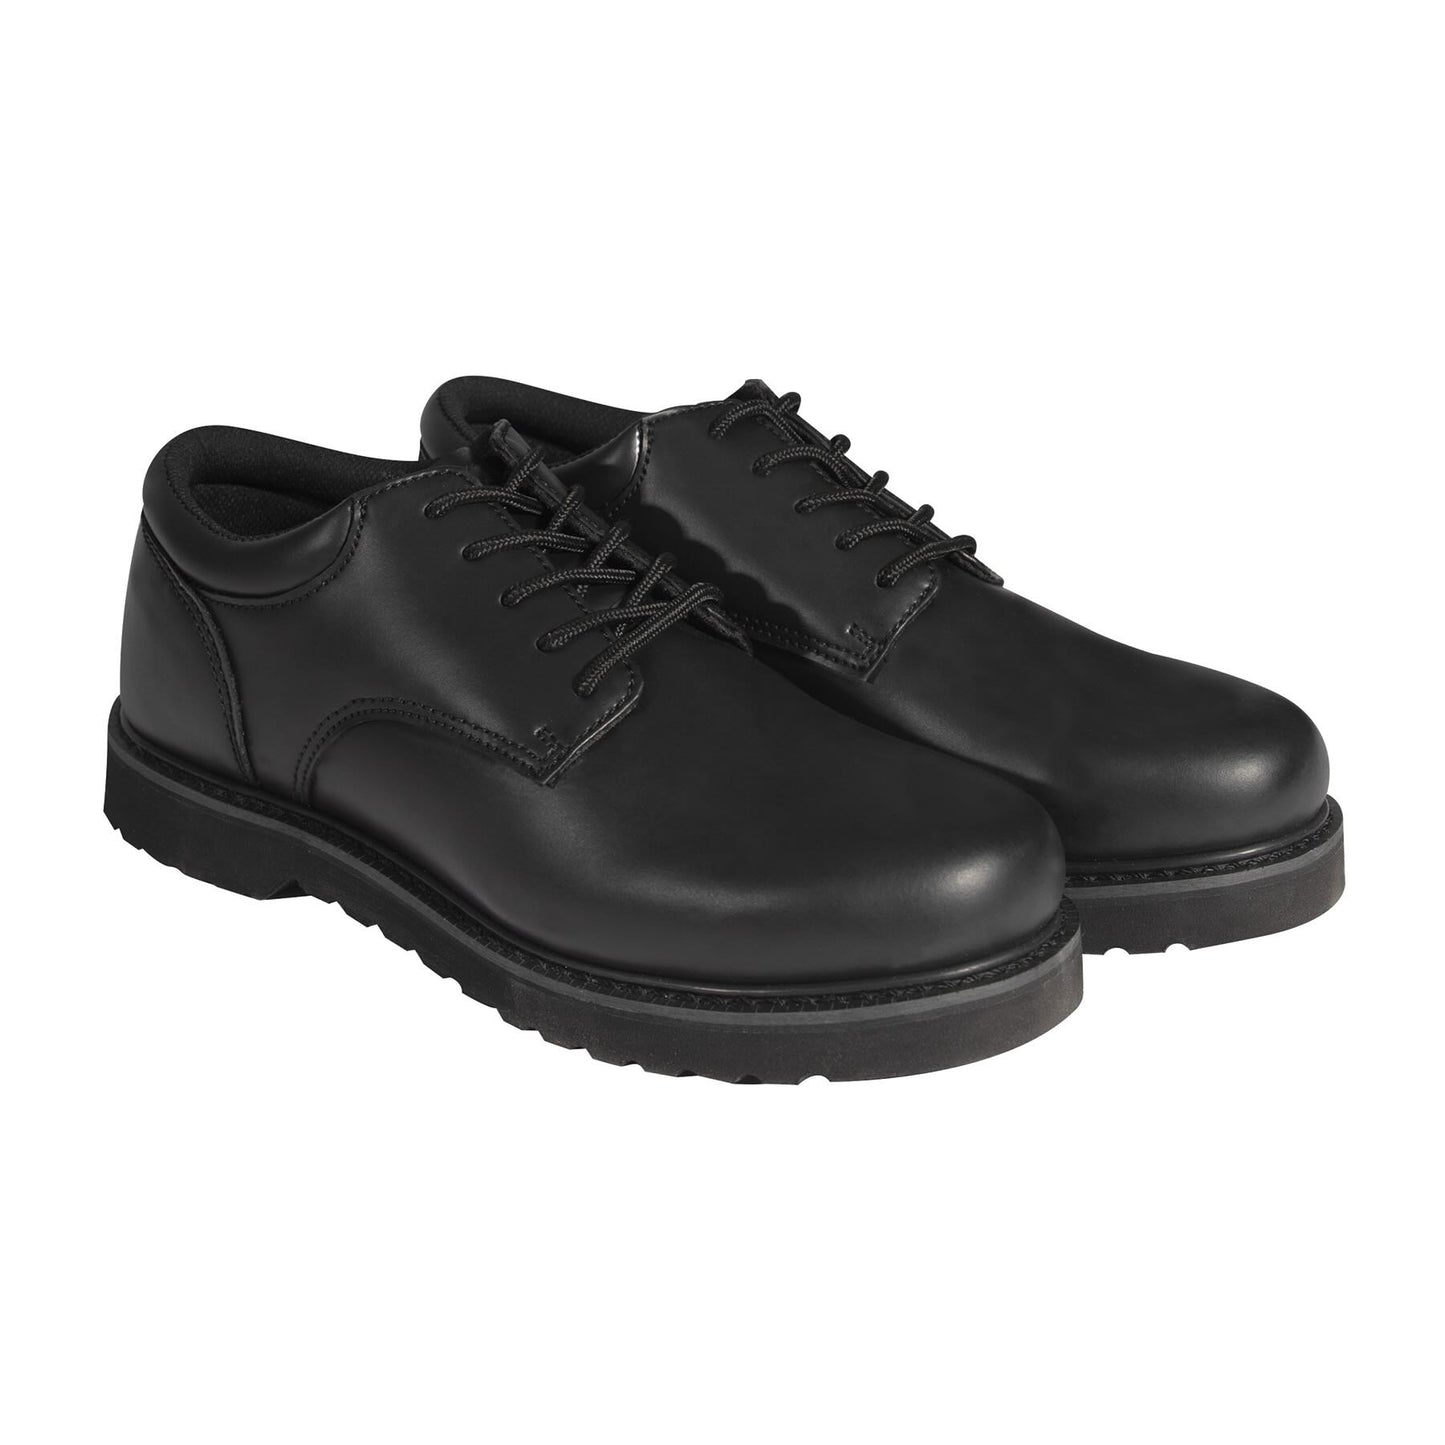 Rothco Military Uniform Oxford With Work Soles